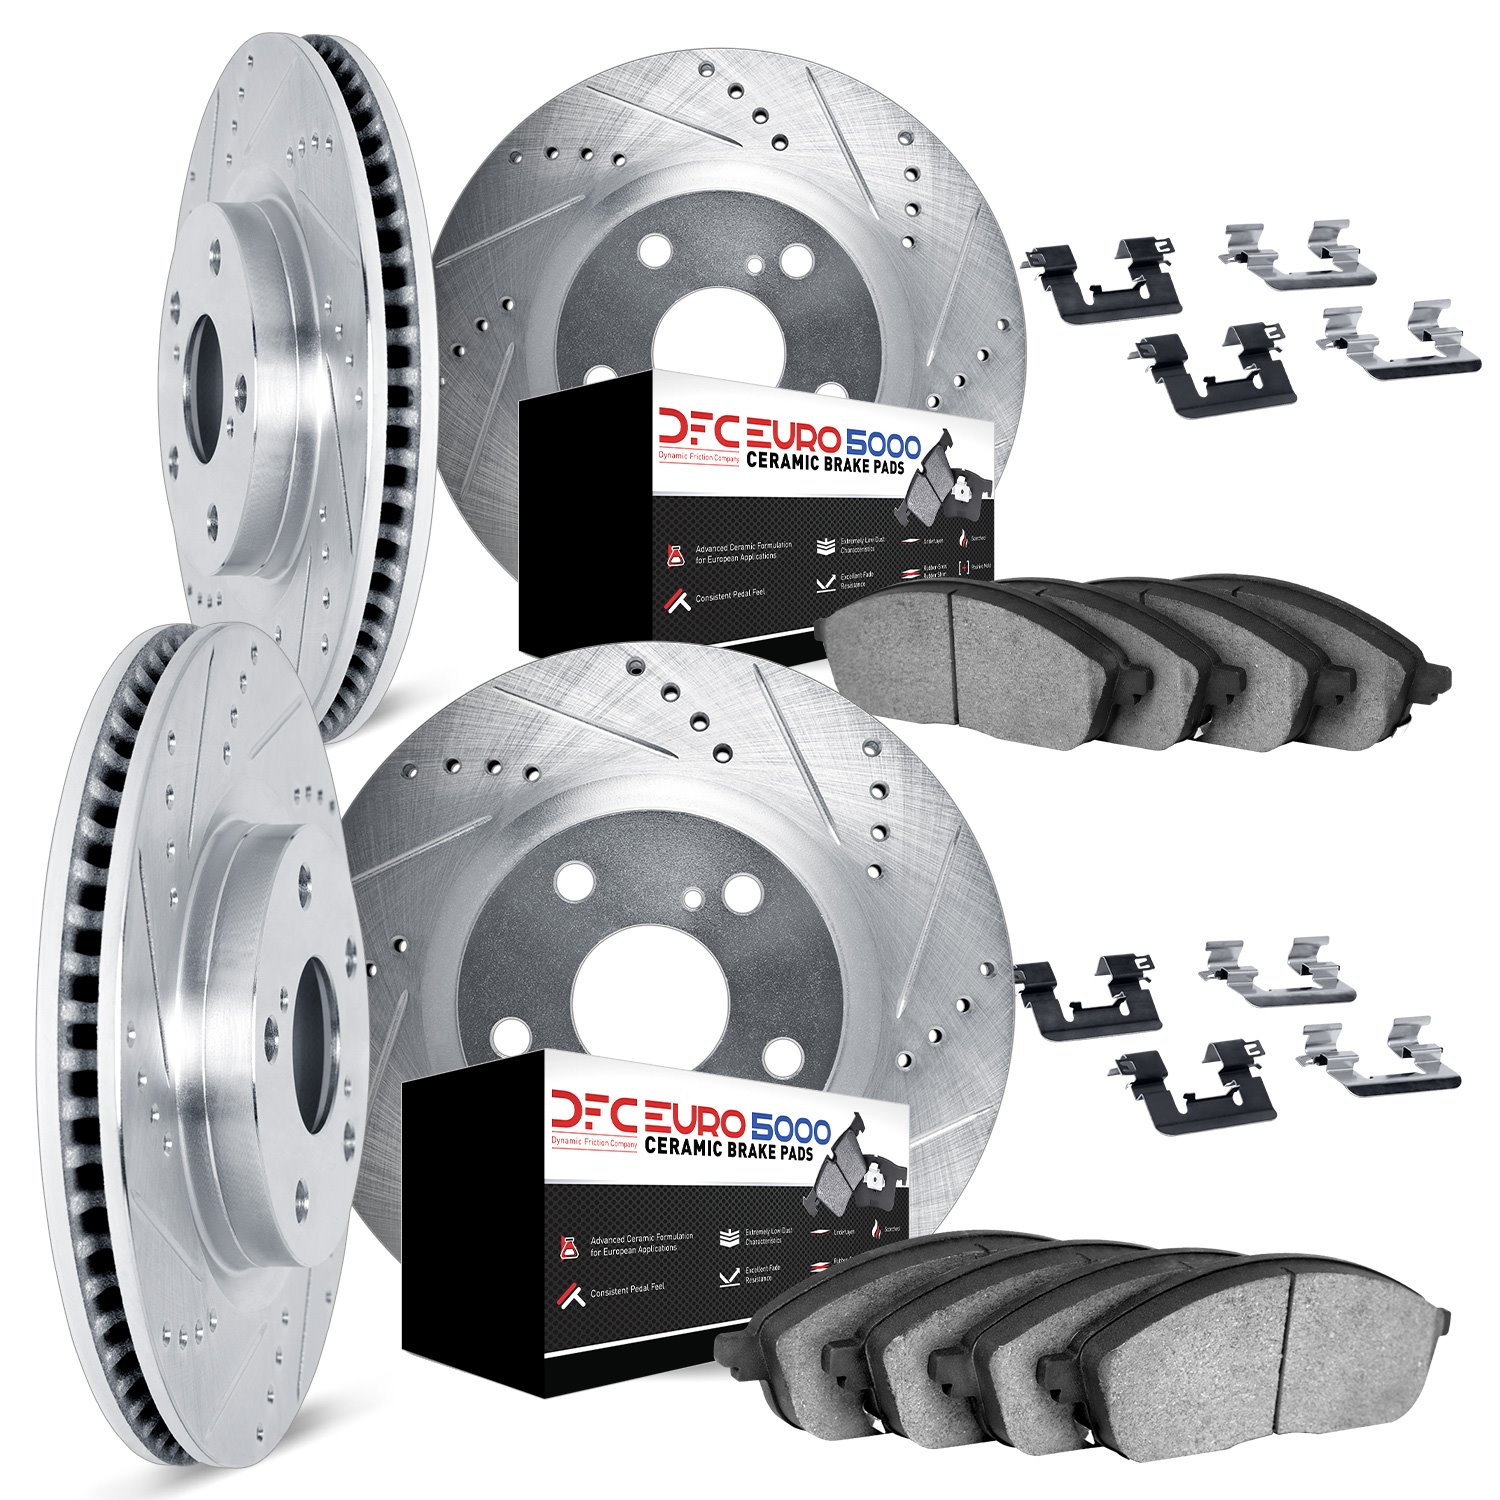 7614-31016 Drilled/Slotted Brake Rotors w/5000 Euro Ceramic Brake Pads Kit & Hardware [Silver], 1996-2003 BMW, Position: Front a